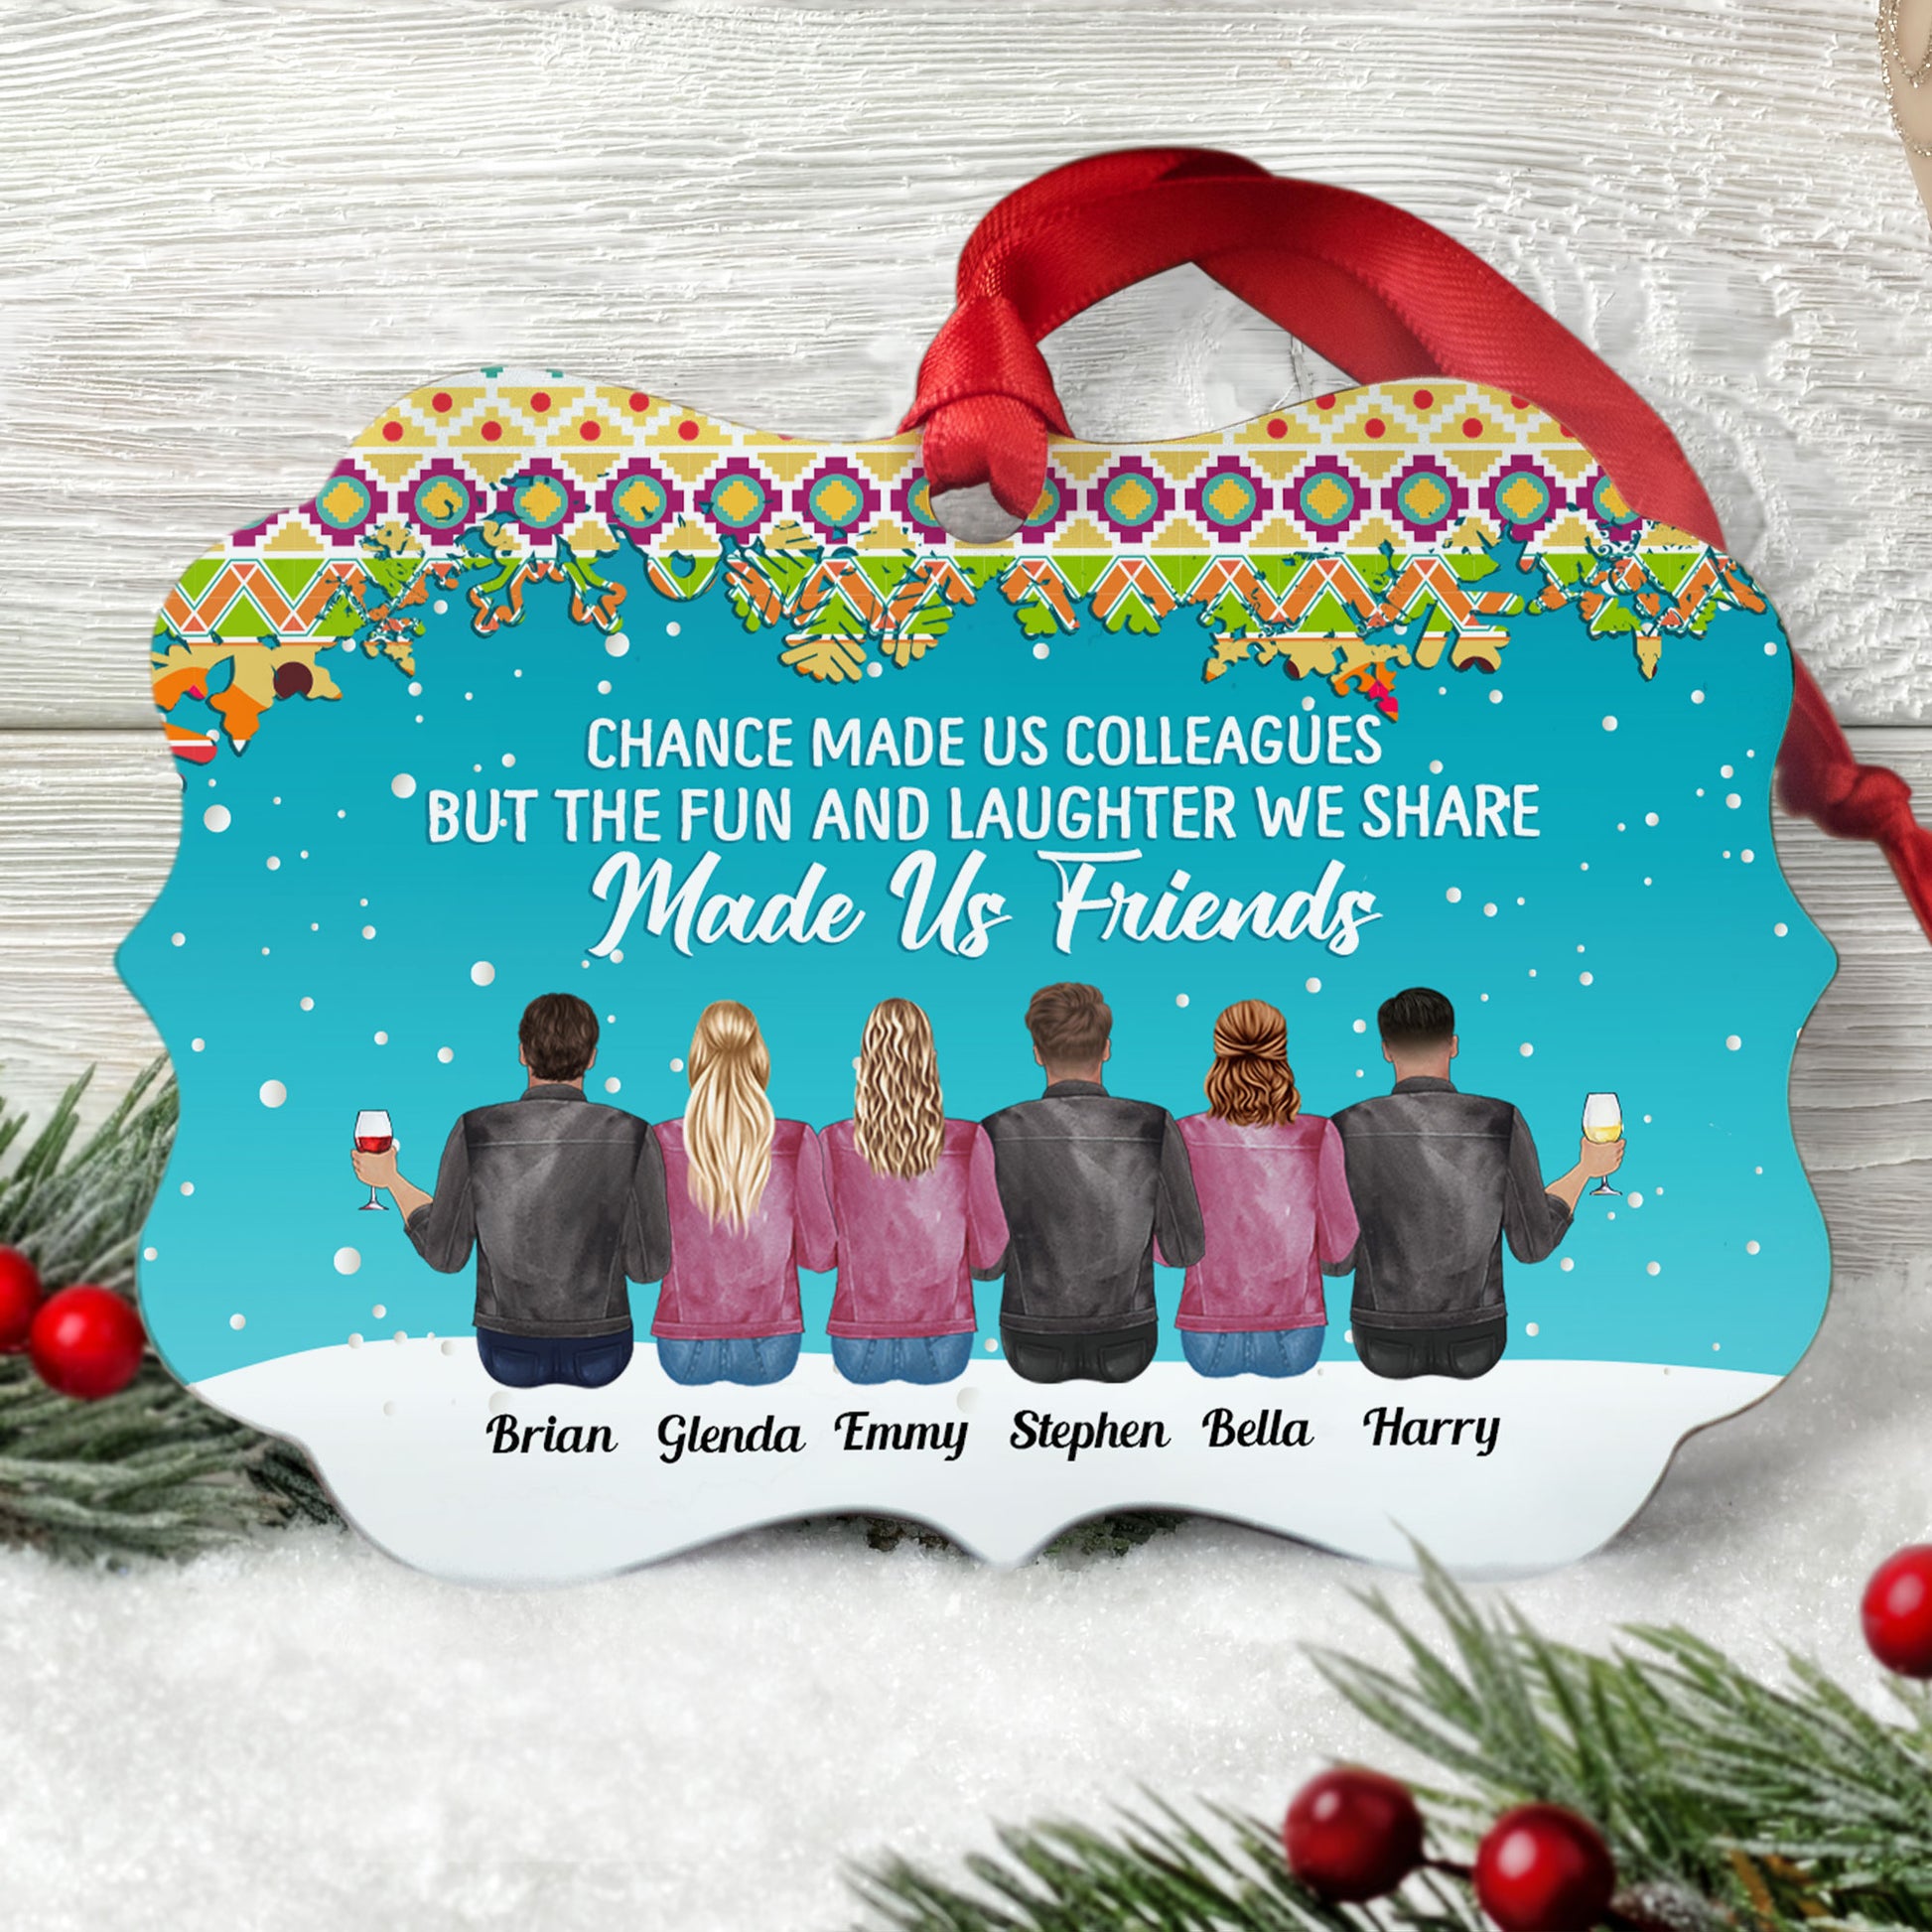 Fun And Laughter Made Us Friends - Personalized Aluminum Ornament - Christmas Gift For Work Friends